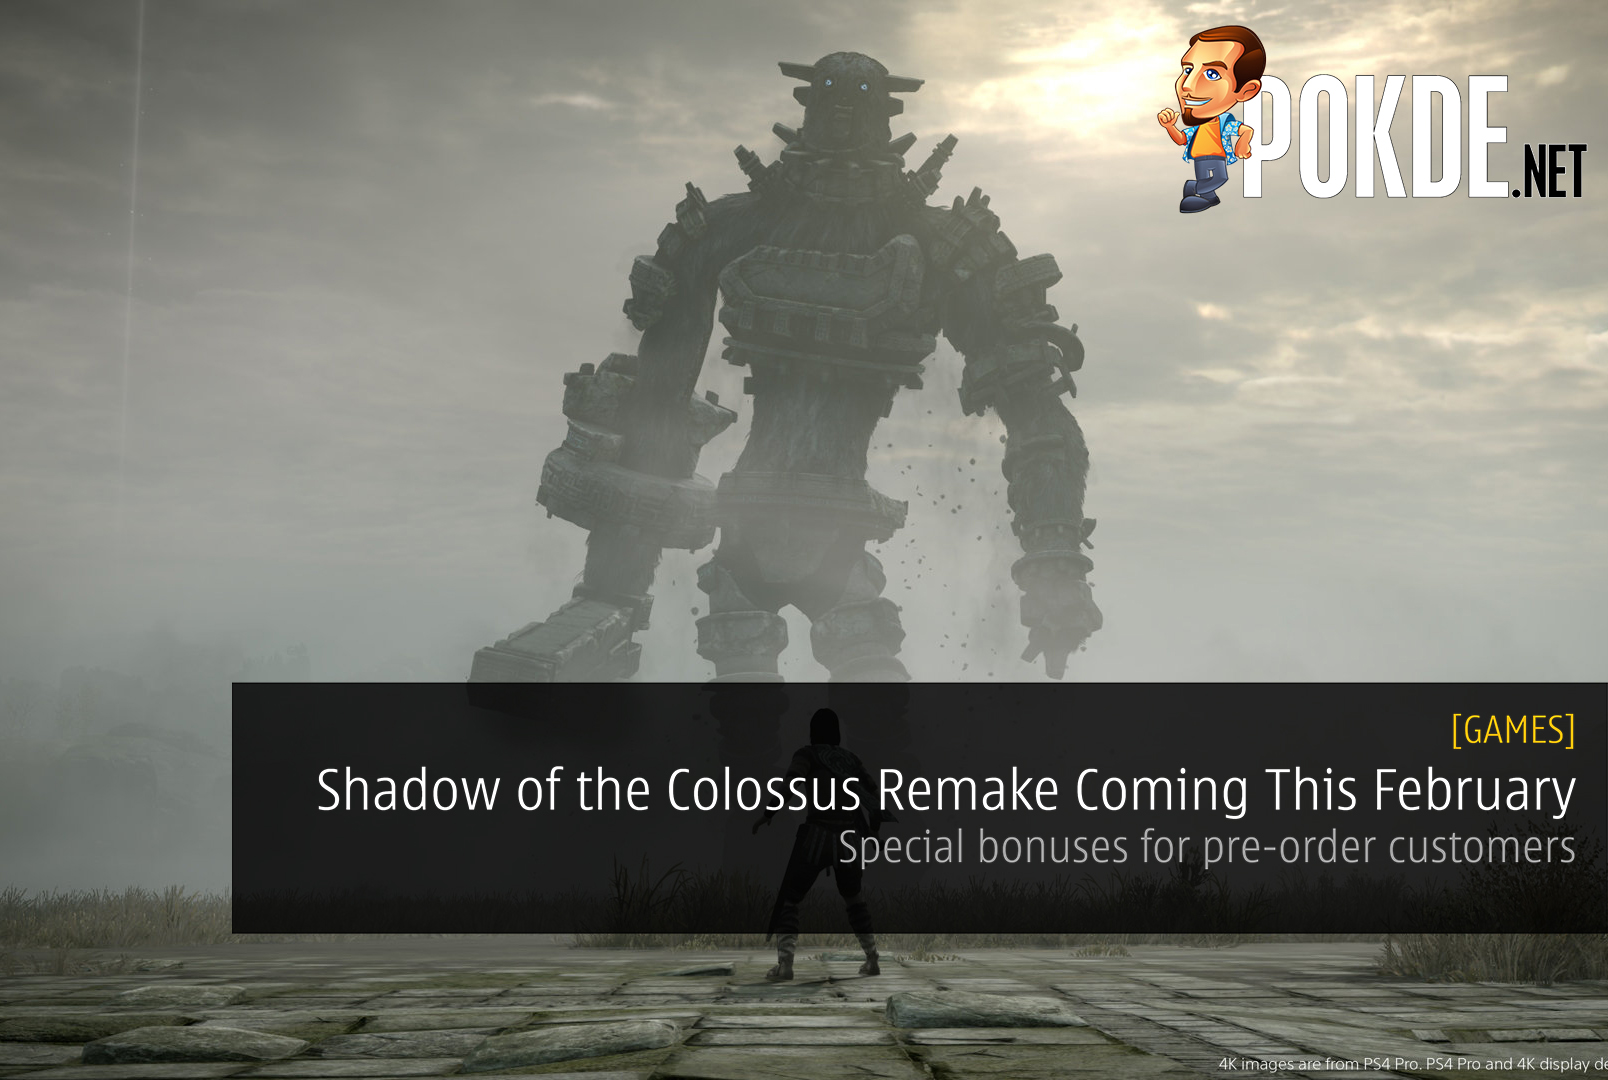 Shadow of the Colossus Remake Coming To The PS4 This February - Special bonuses for pre-order customers 38